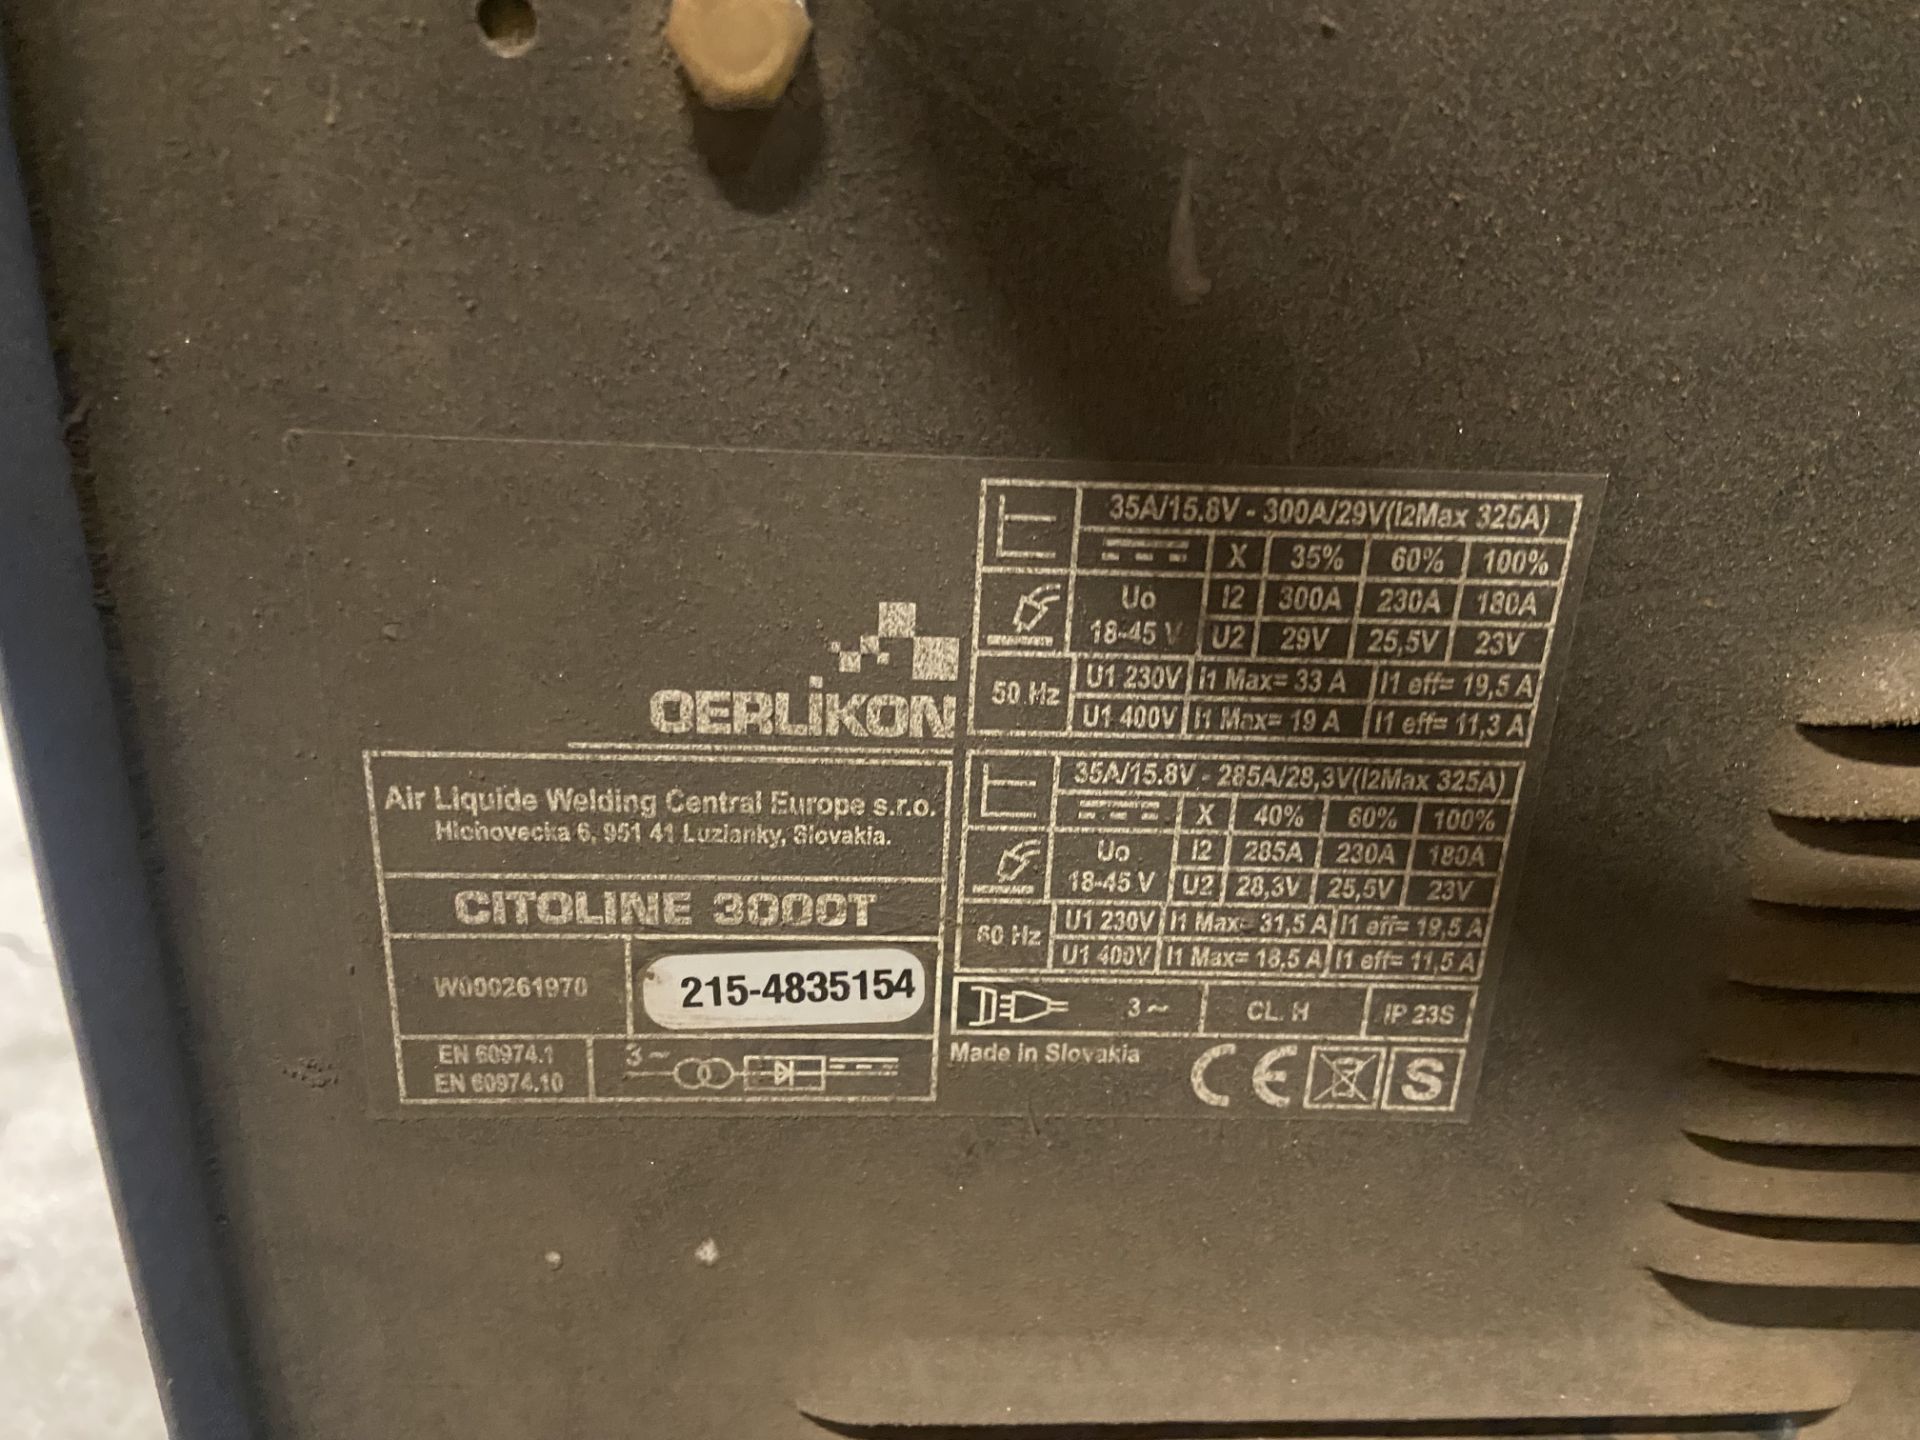 Oerlikon Citoline 3000T Mig Welding Set, serial no. 215-4835154 Please read the following - Image 3 of 3